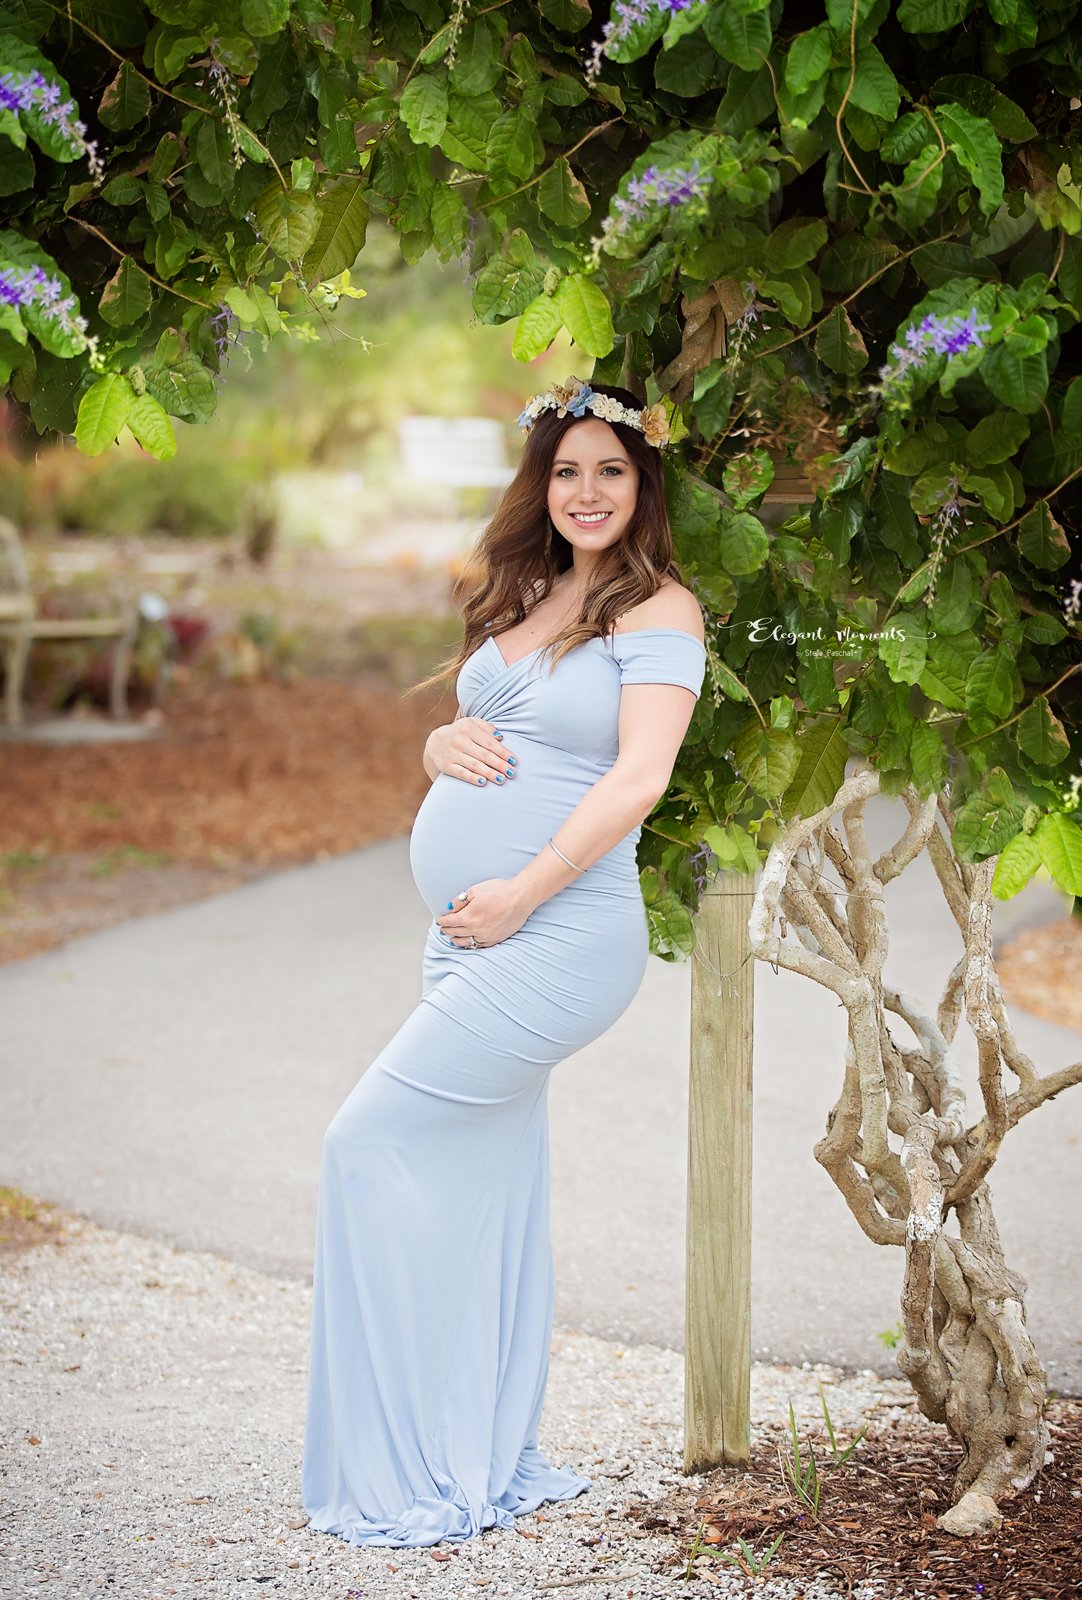 Maternity Picture Ideas - Sew Trendy Company image 